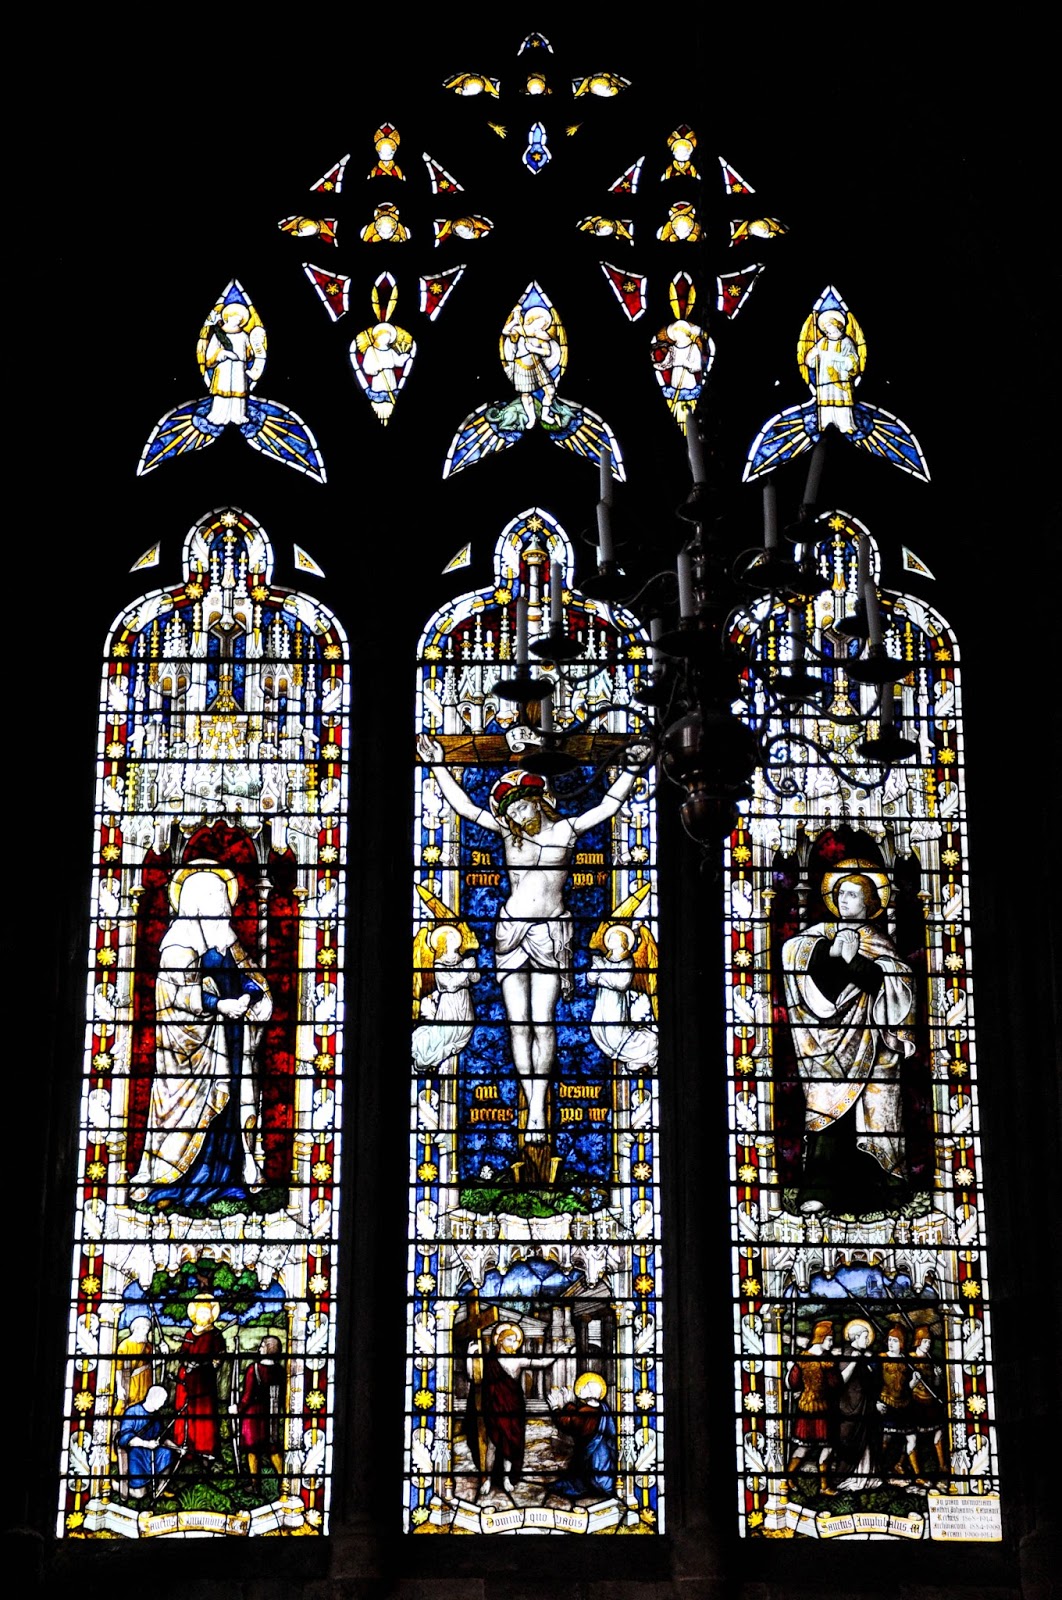 Stained glass window, St. Albans Cathedral, St. Albans, Herts, England